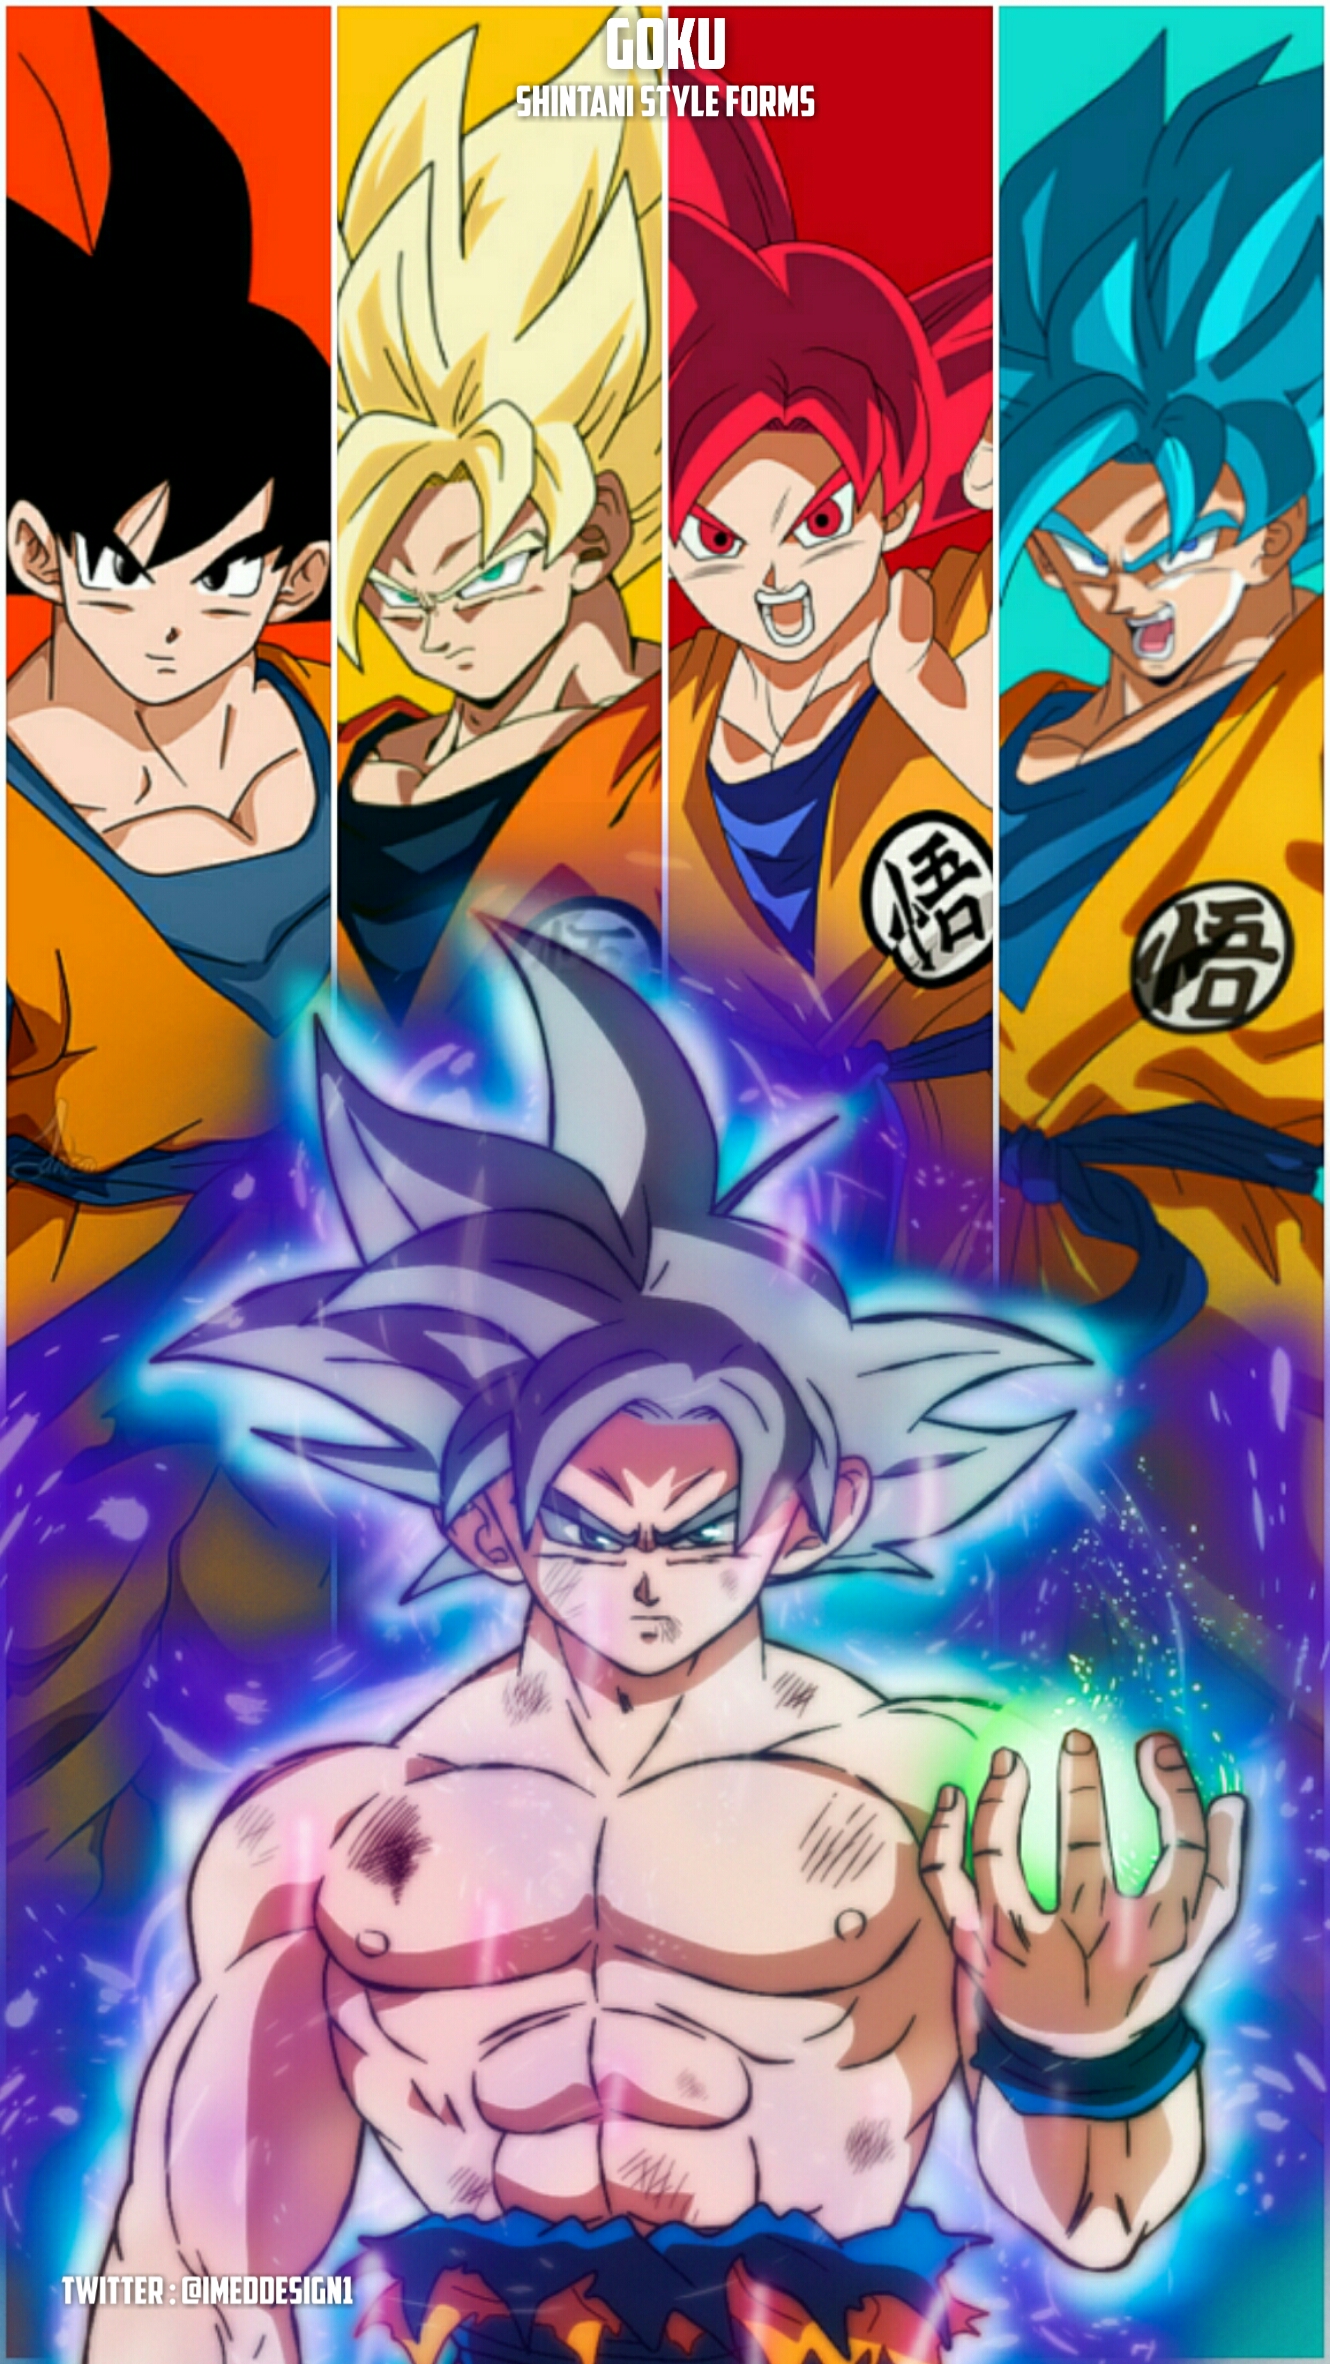 Wallpaper Of Goku Shintani Style Forms Dbs Broly By Imedjimmy On